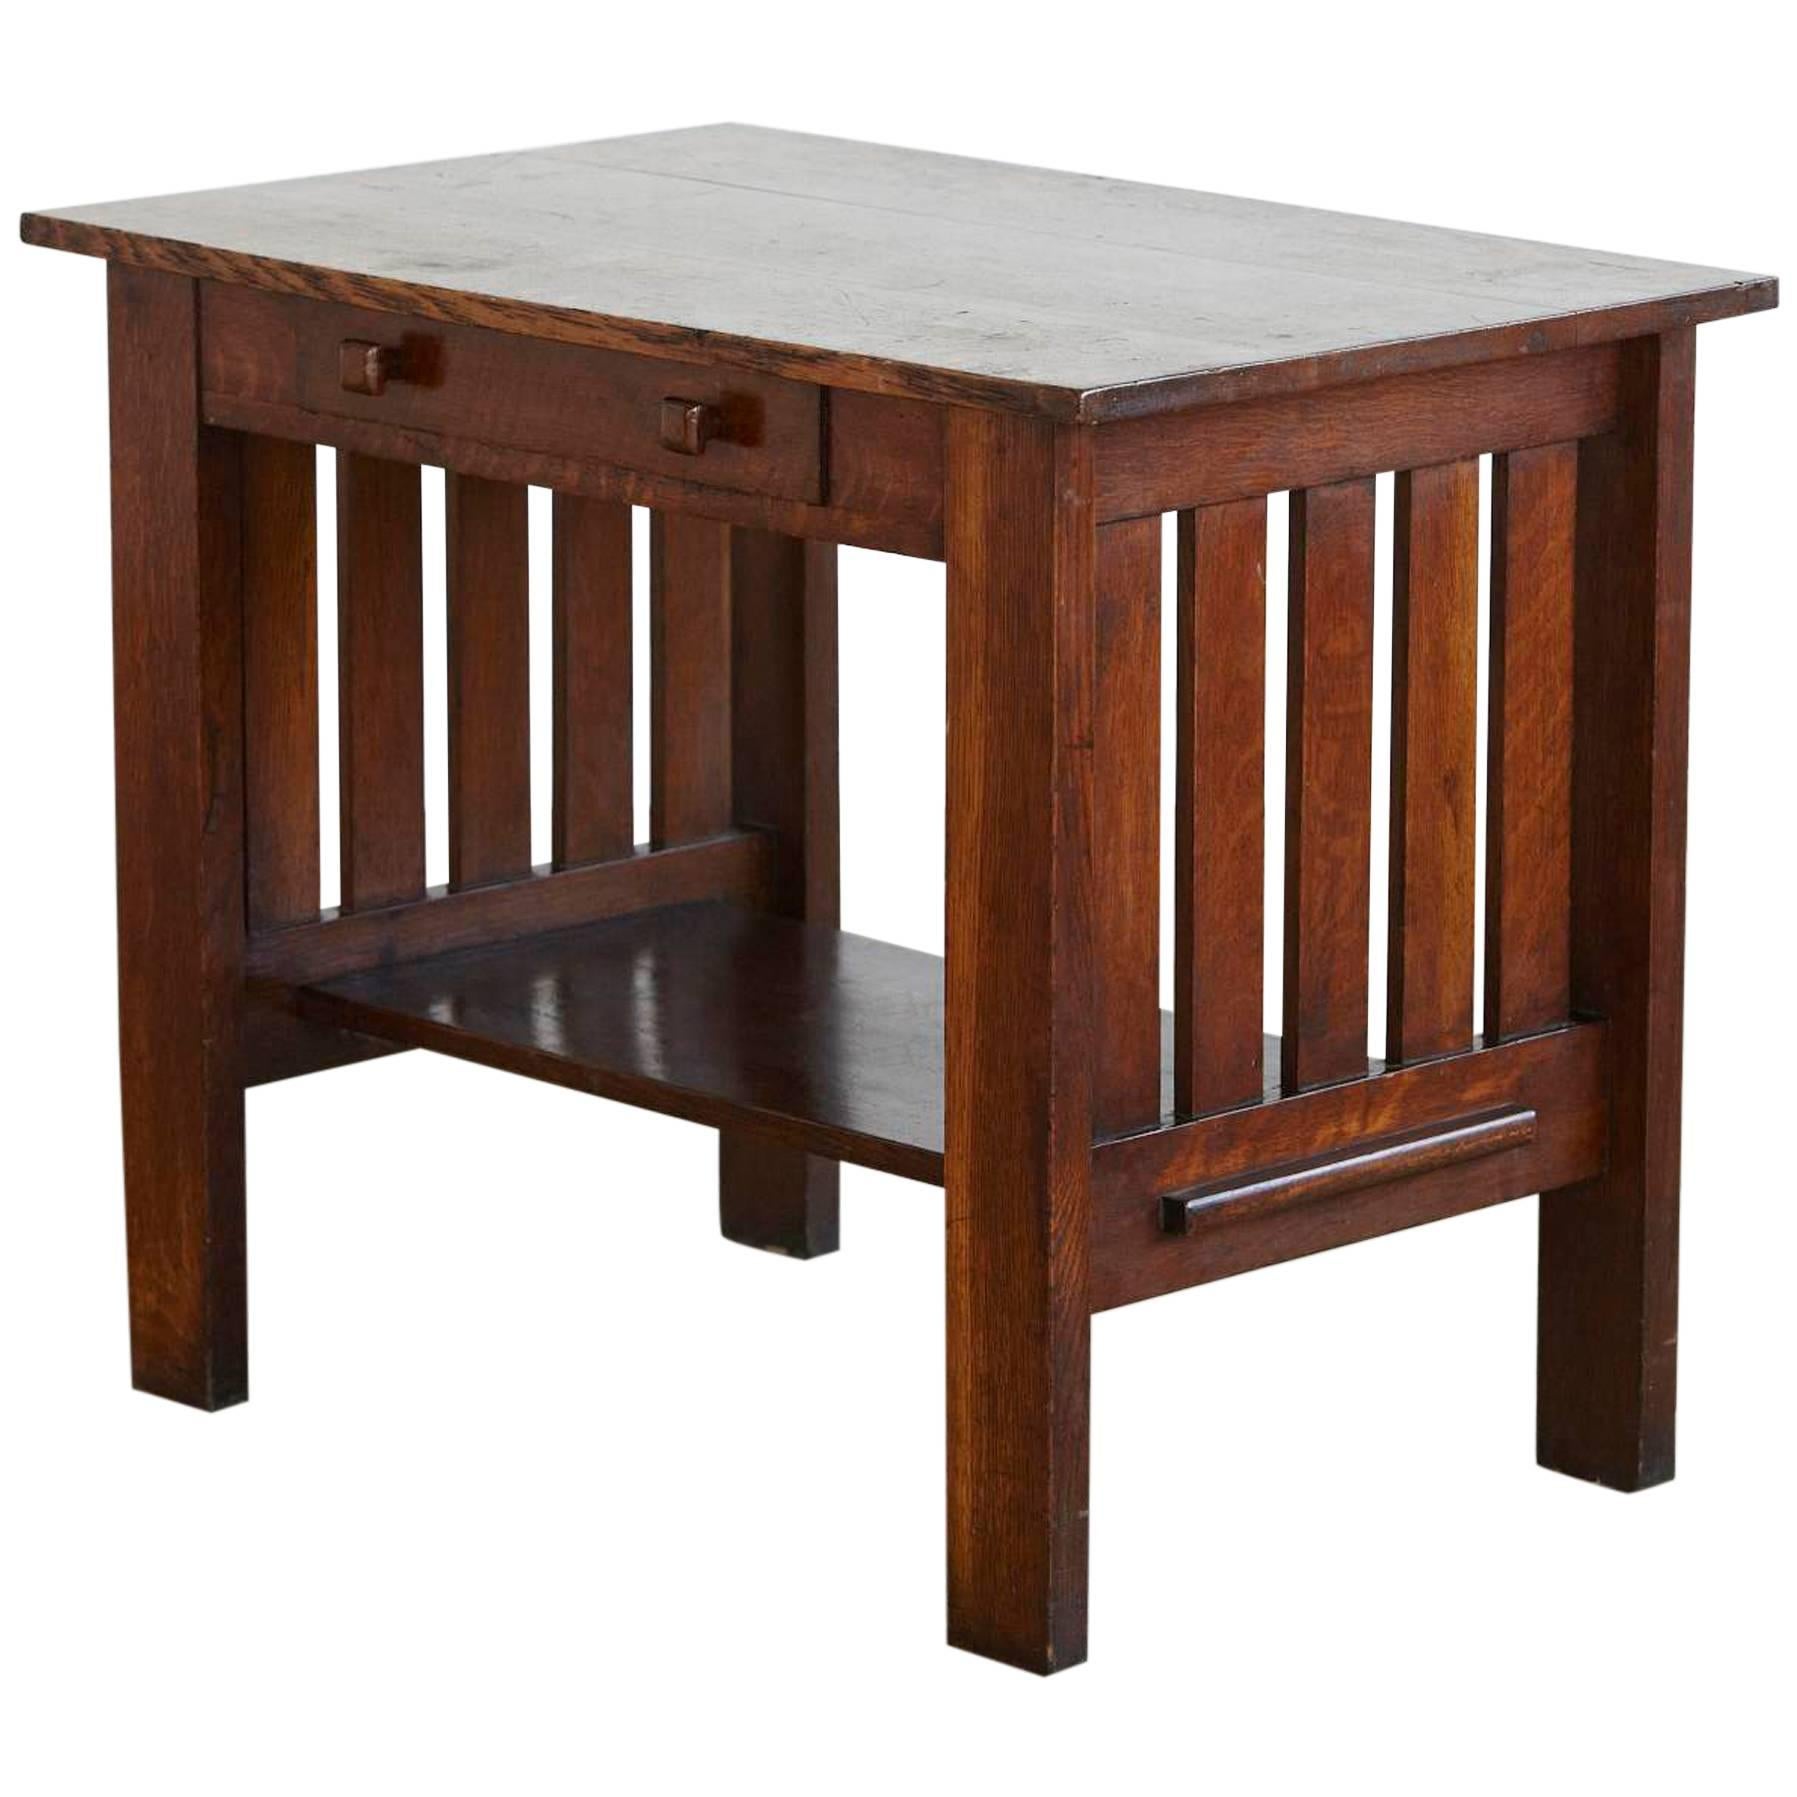 Arts & Crafts Mission Style Oak Library Table from the Estate of José Ferrer